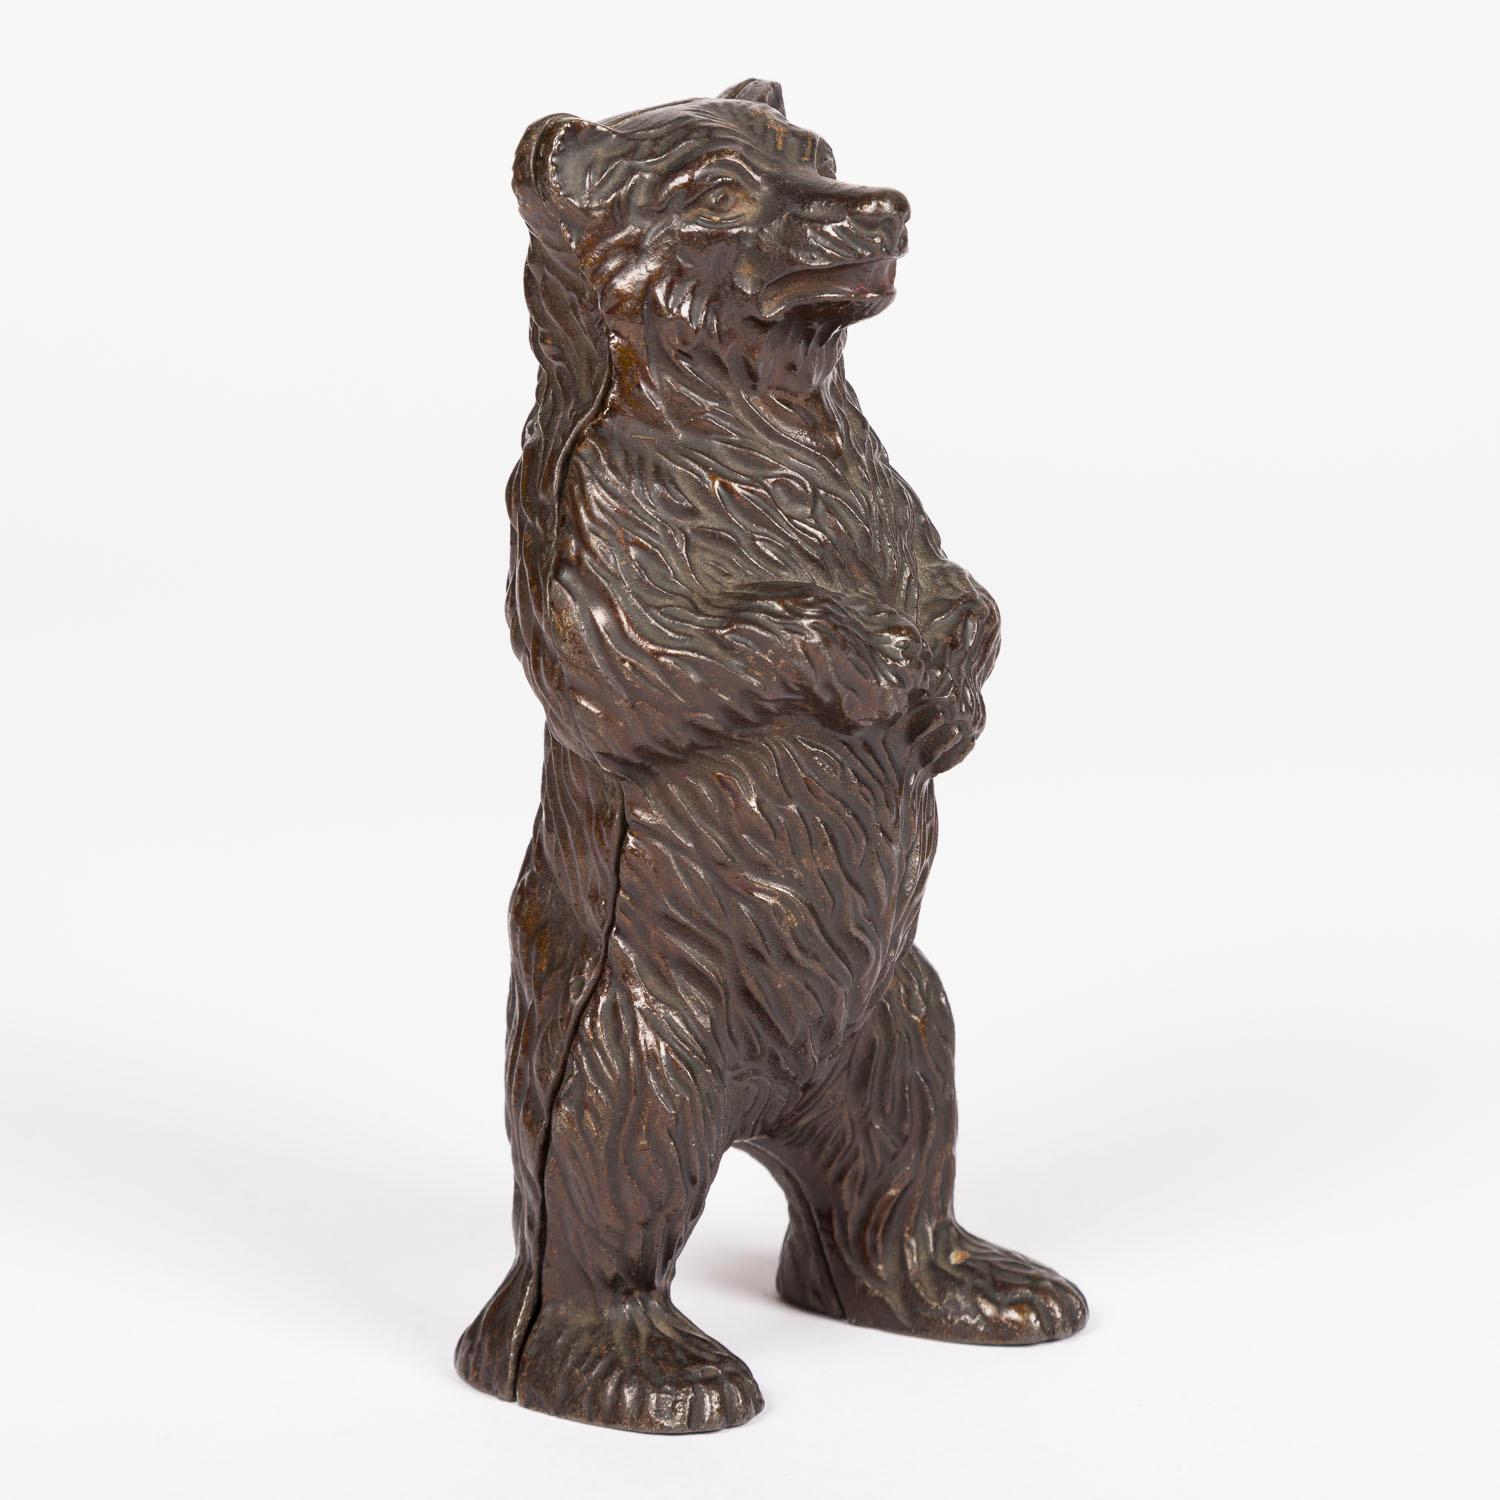 A late Victorian patinated cast iron standing bear money box, registered design by John Harper & Co.  

John Harper Co. Ironfounders, Albion Works, Willenhall, Staffordshire, England. Founded by lock maker William Harper in 1790.